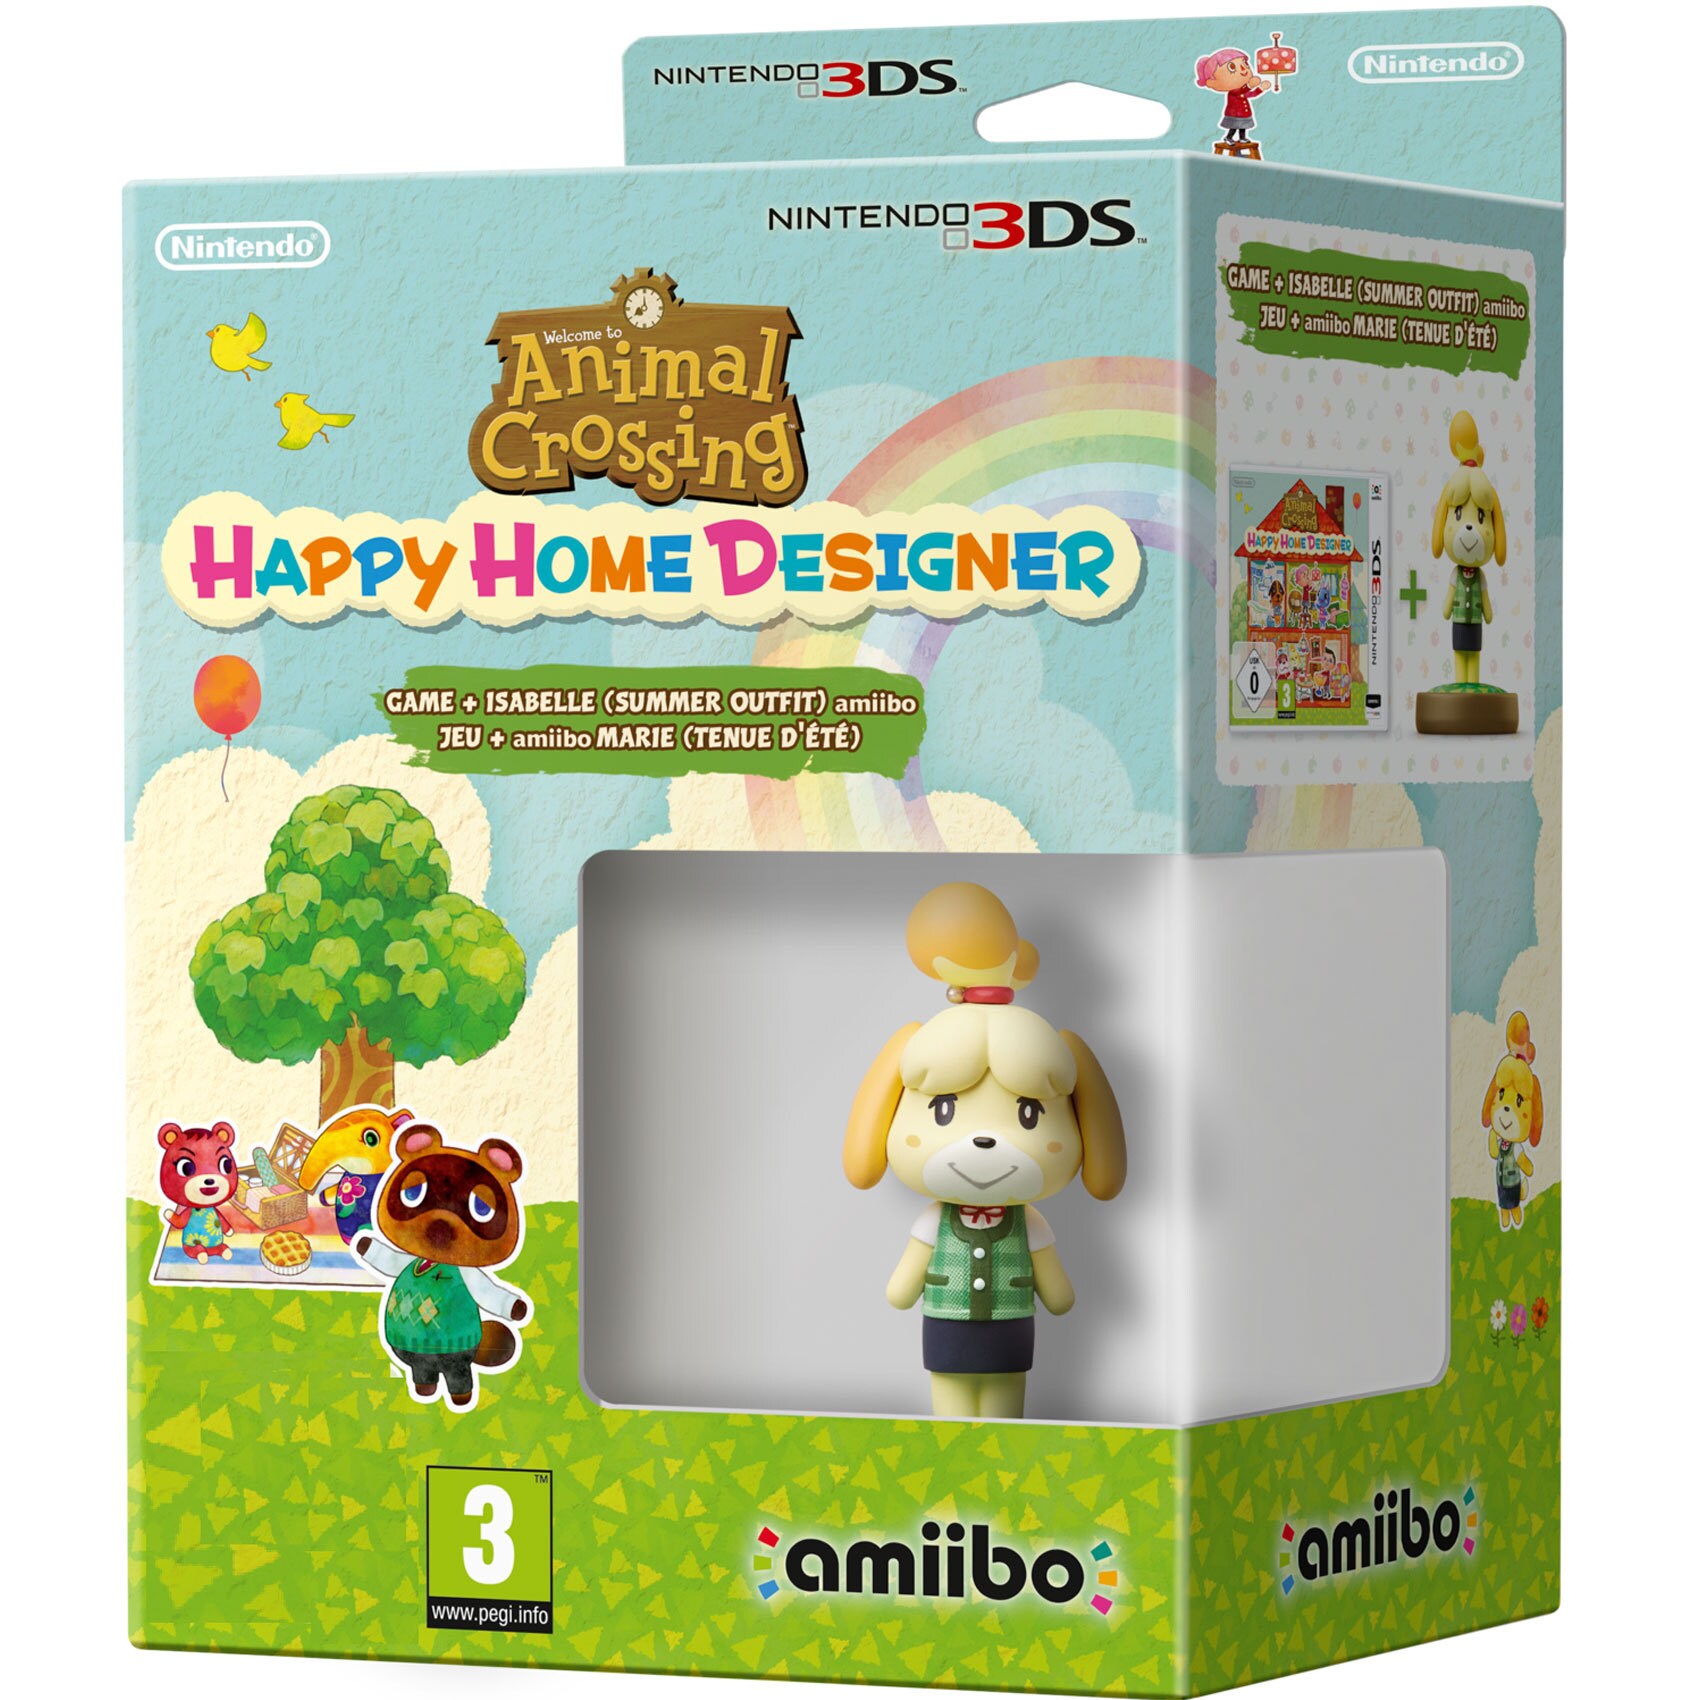 Buy Nintendo 3ds Animal Crossing Happy Home Designer Game Isabelle Summer Outfit Amiibo Online Shop Electronics Appliances On Carrefour Uae,Easy Nail Art Designs Black And White